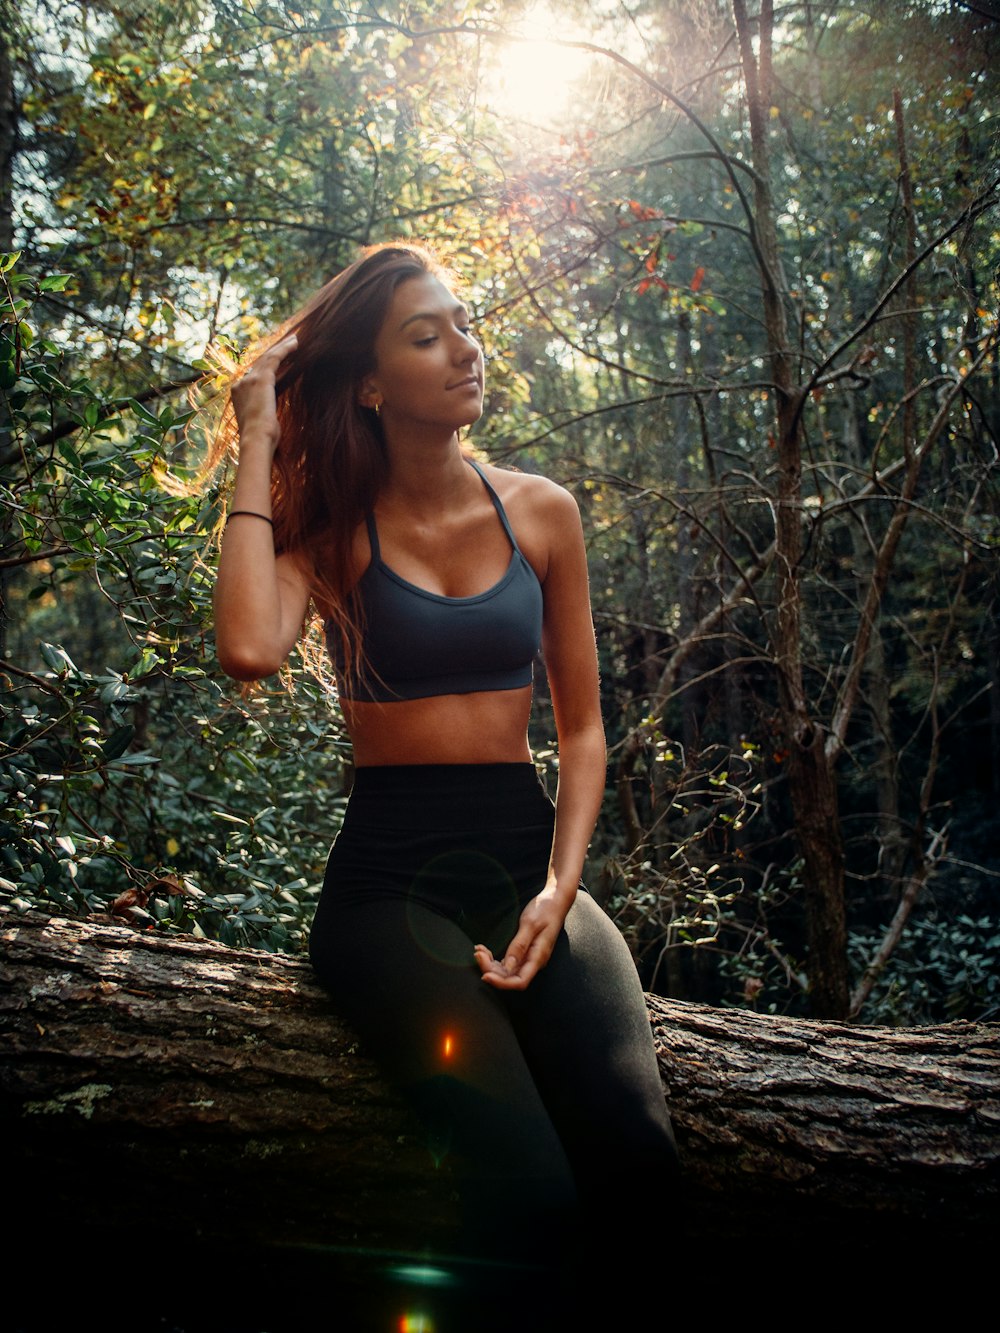 Fit pretty black girl in sports bra and shorts running down a trail  surounded by trees and grass. Stone stairwell in the background Stock Photo  - Alamy